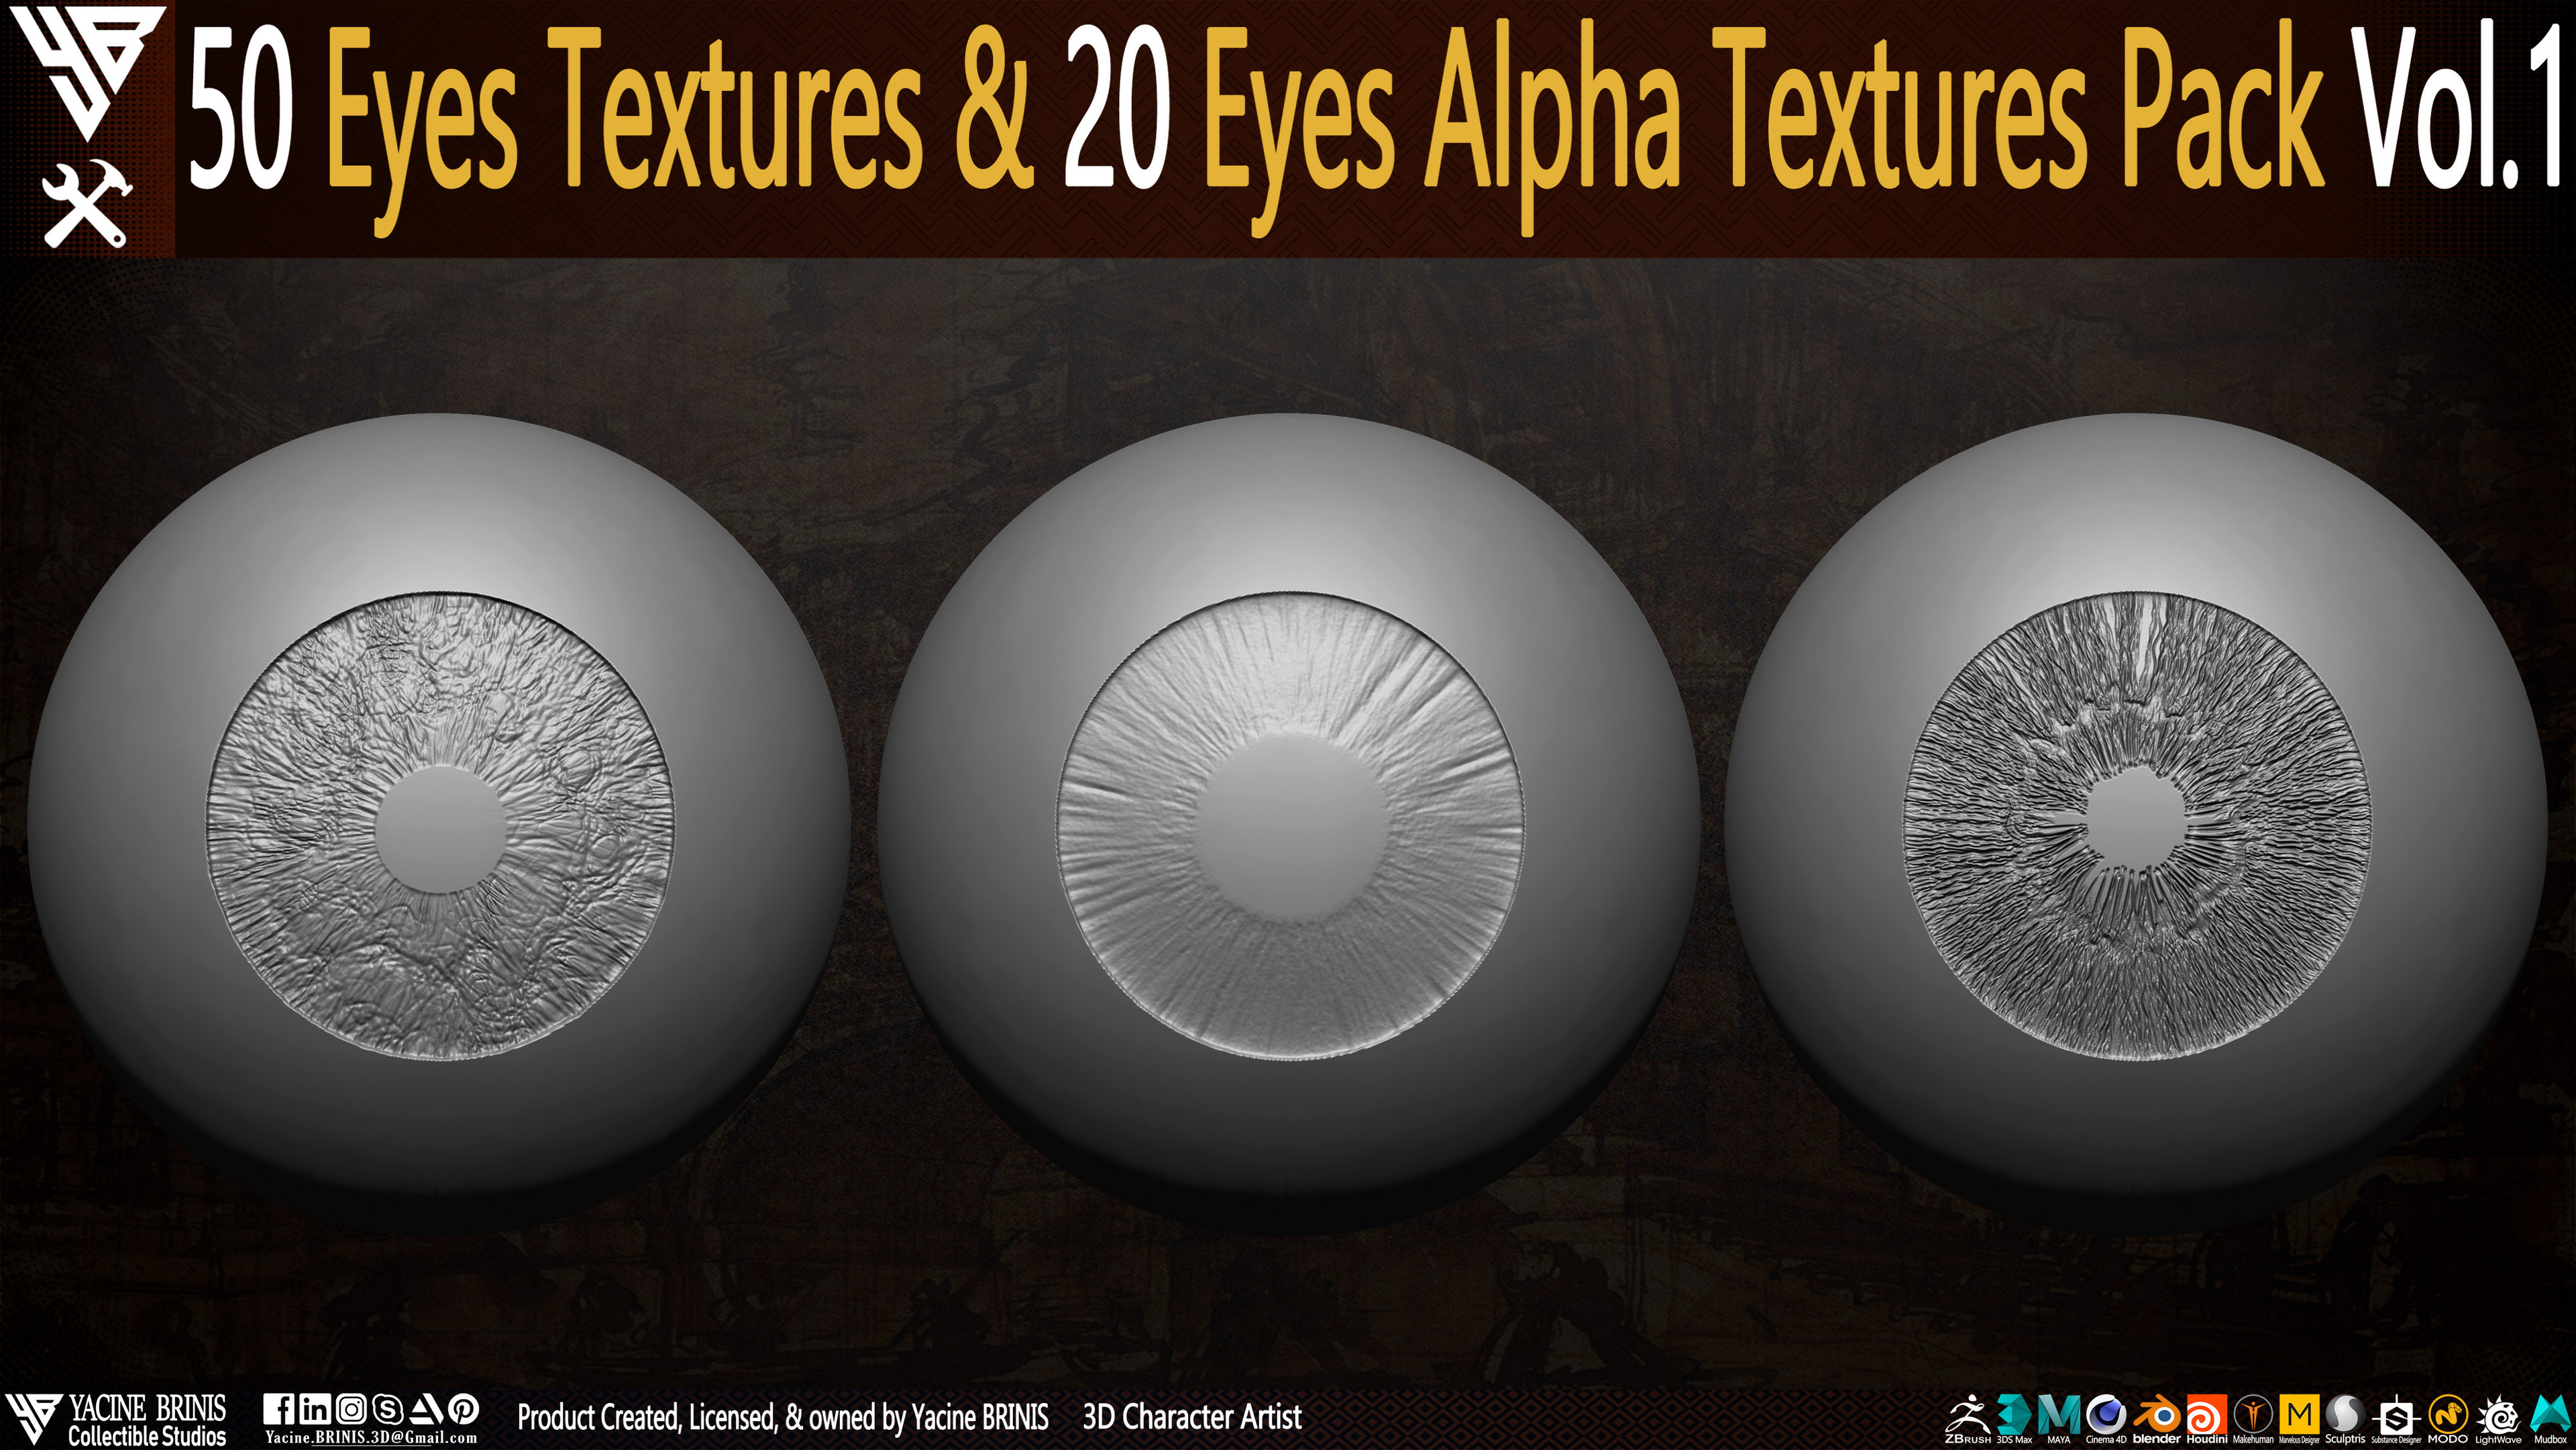 50 Eyes Textures and 20 Eyes Alpha Textures Pack Vol 01 sculpted by Yacine BRINIS Set 03